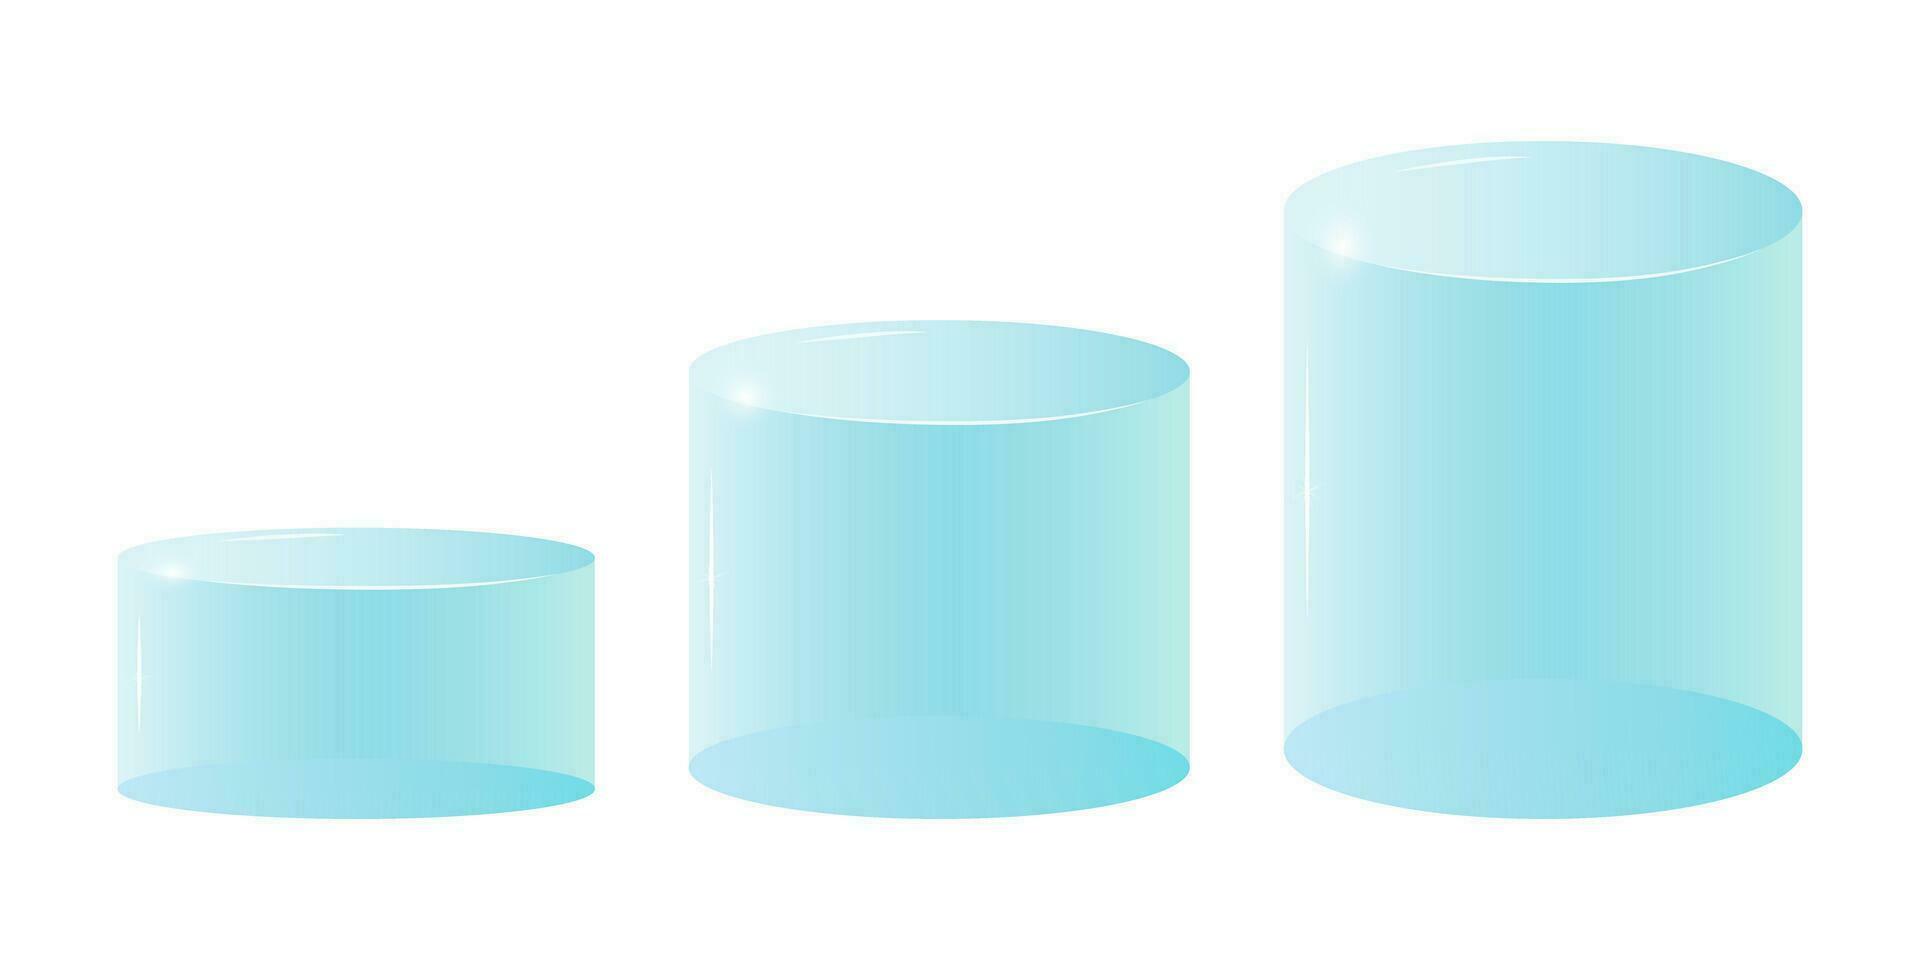 Transparent glass cube shapes in realistic style. vector